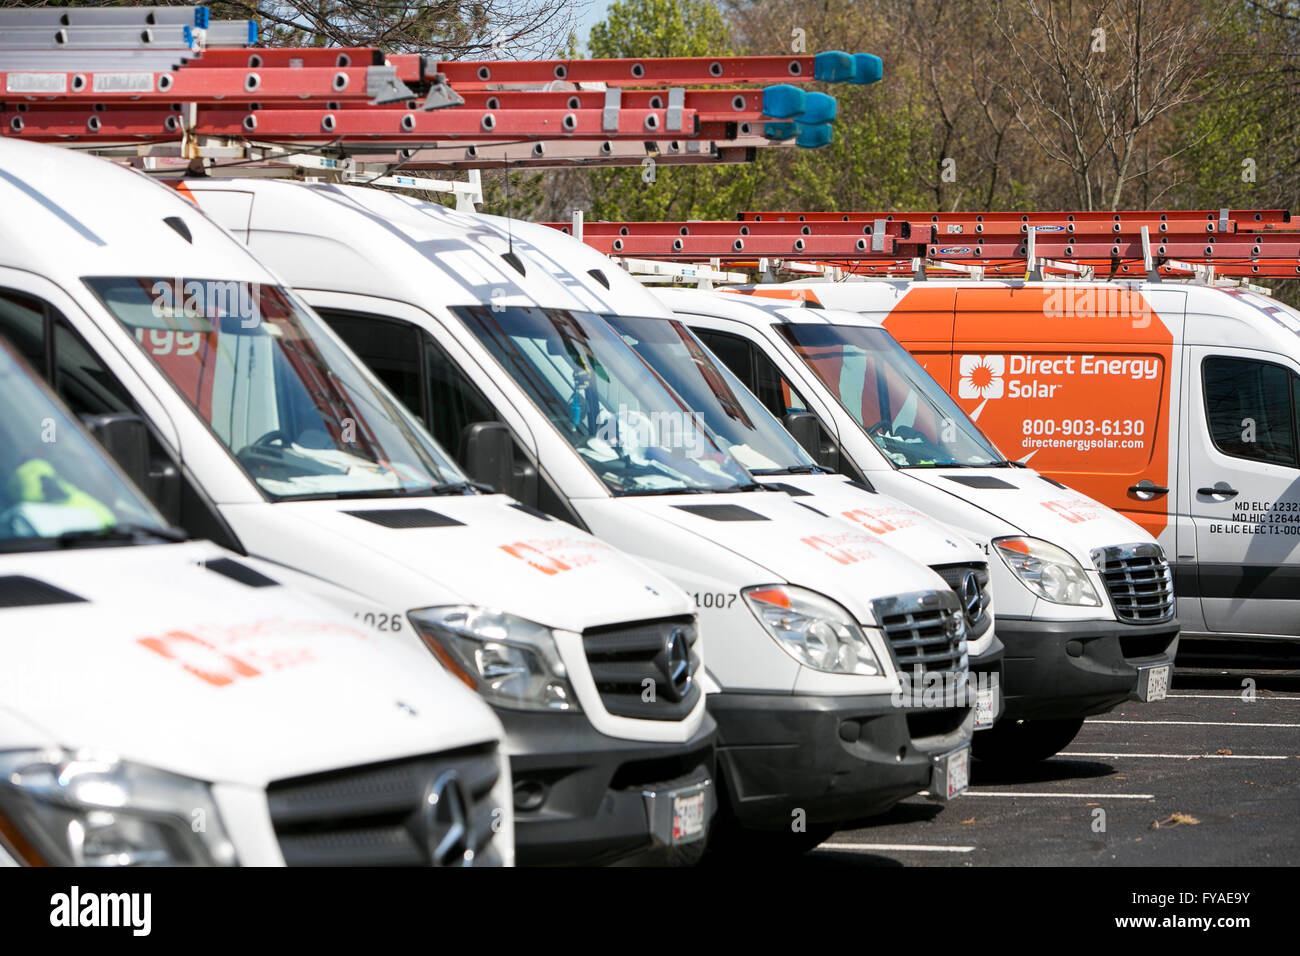 Work vans featuring Direct Energy Solar logos in Columbia, Maryland on April 10, 2016. Stock Photo